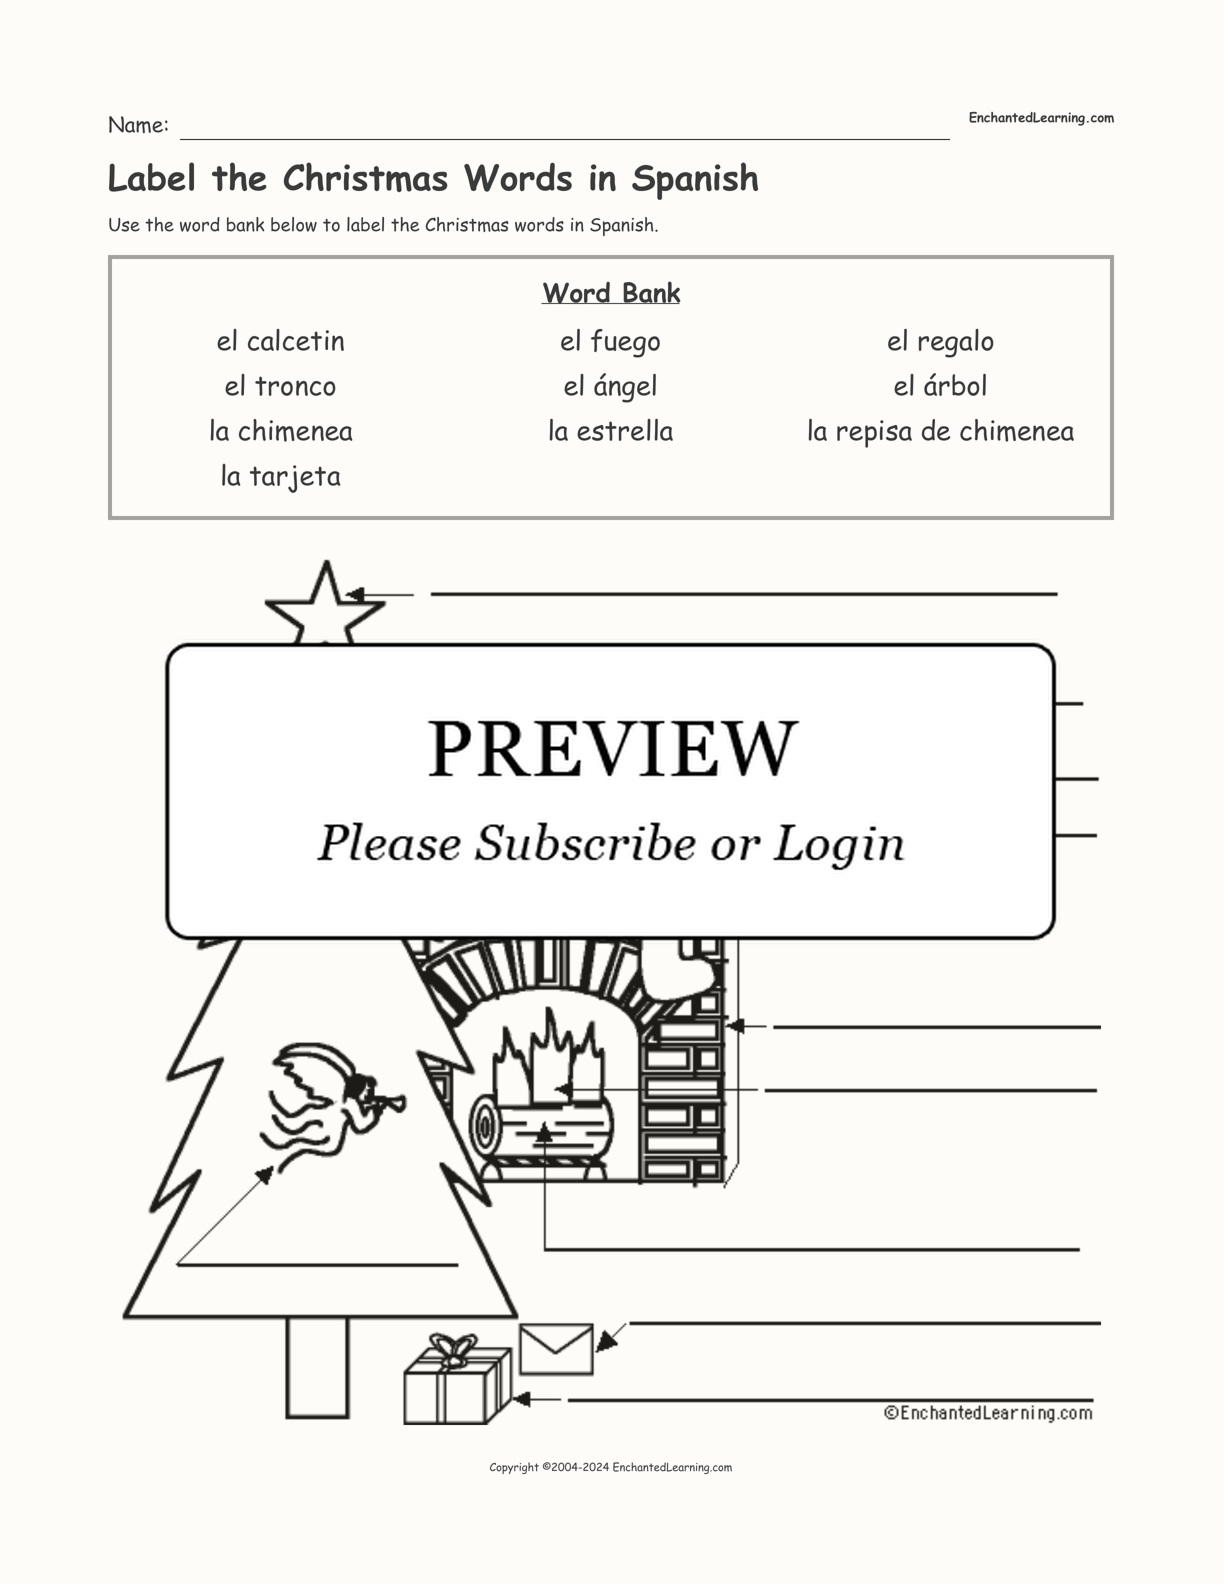 Label the Christmas Words in Spanish interactive worksheet page 1